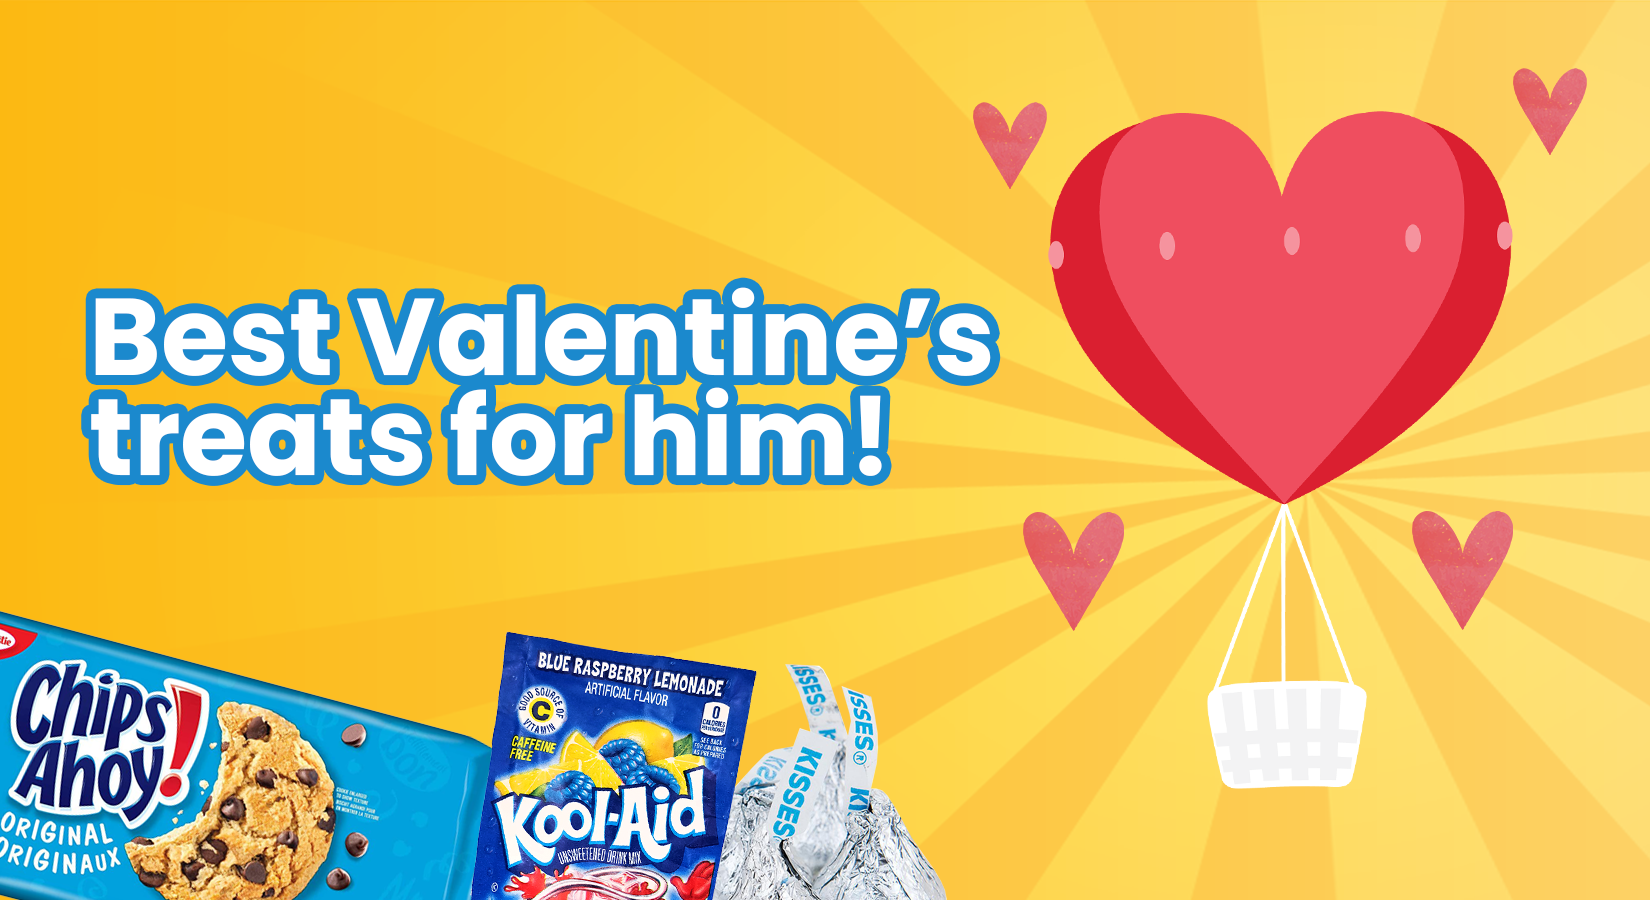 Best Valentine's Treats for HIM